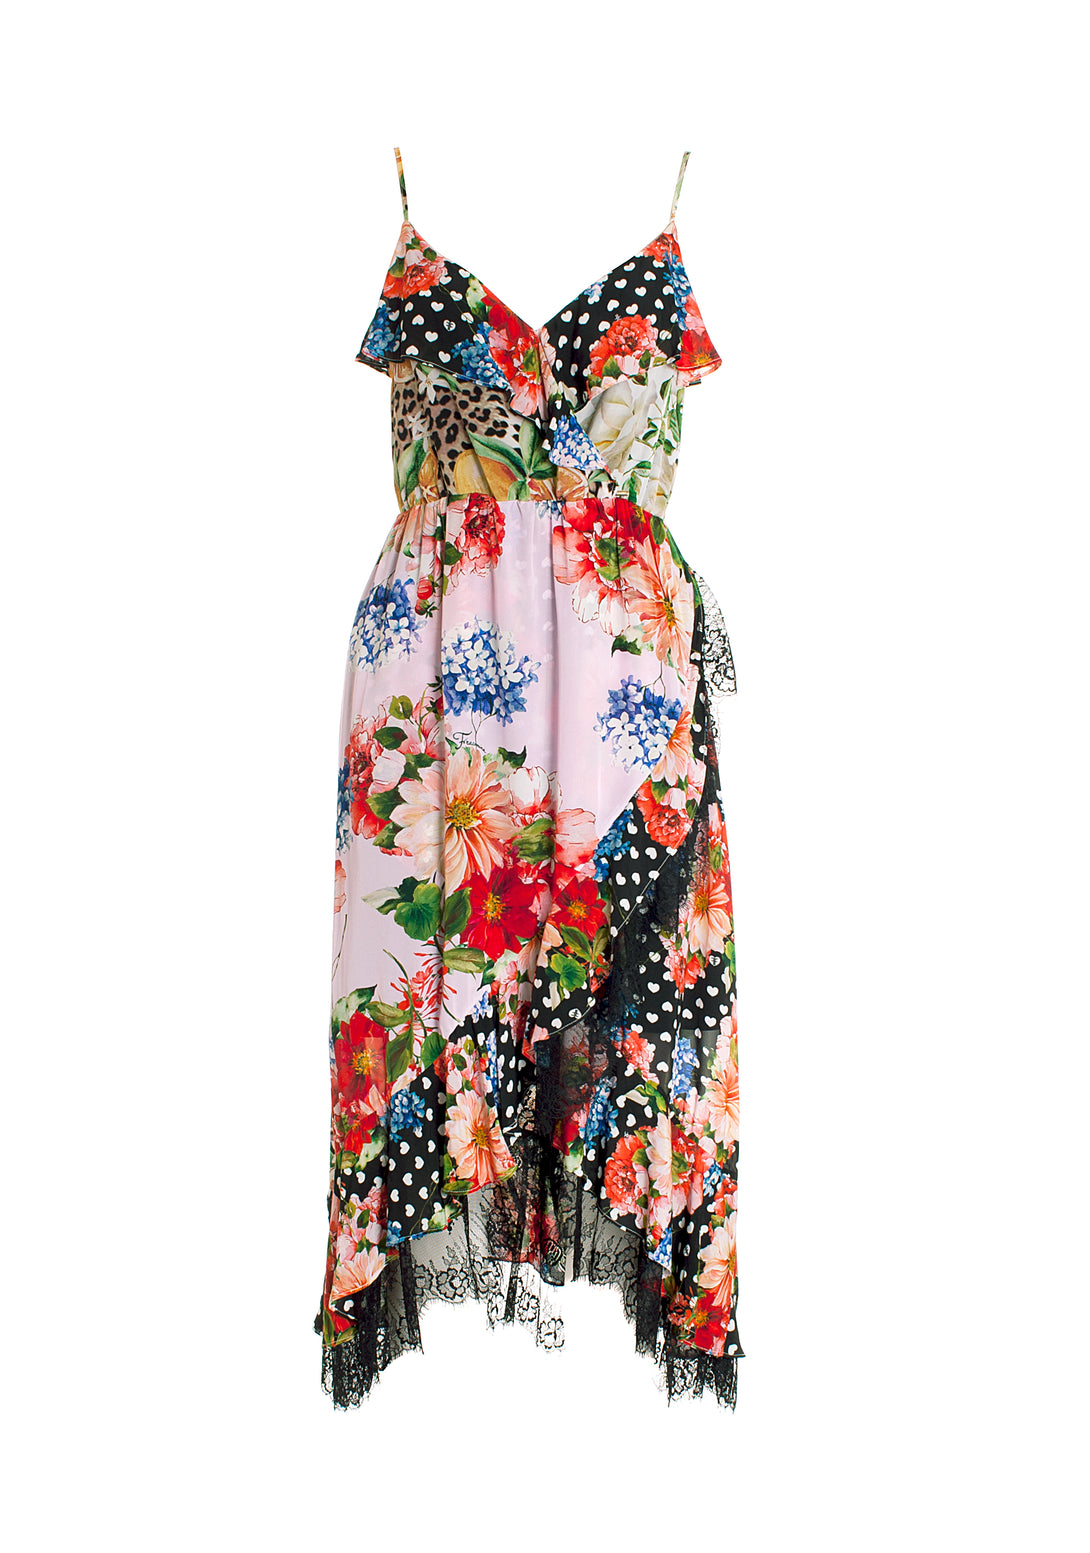 Dress with no sleeves, middle length, and multicolor pattern